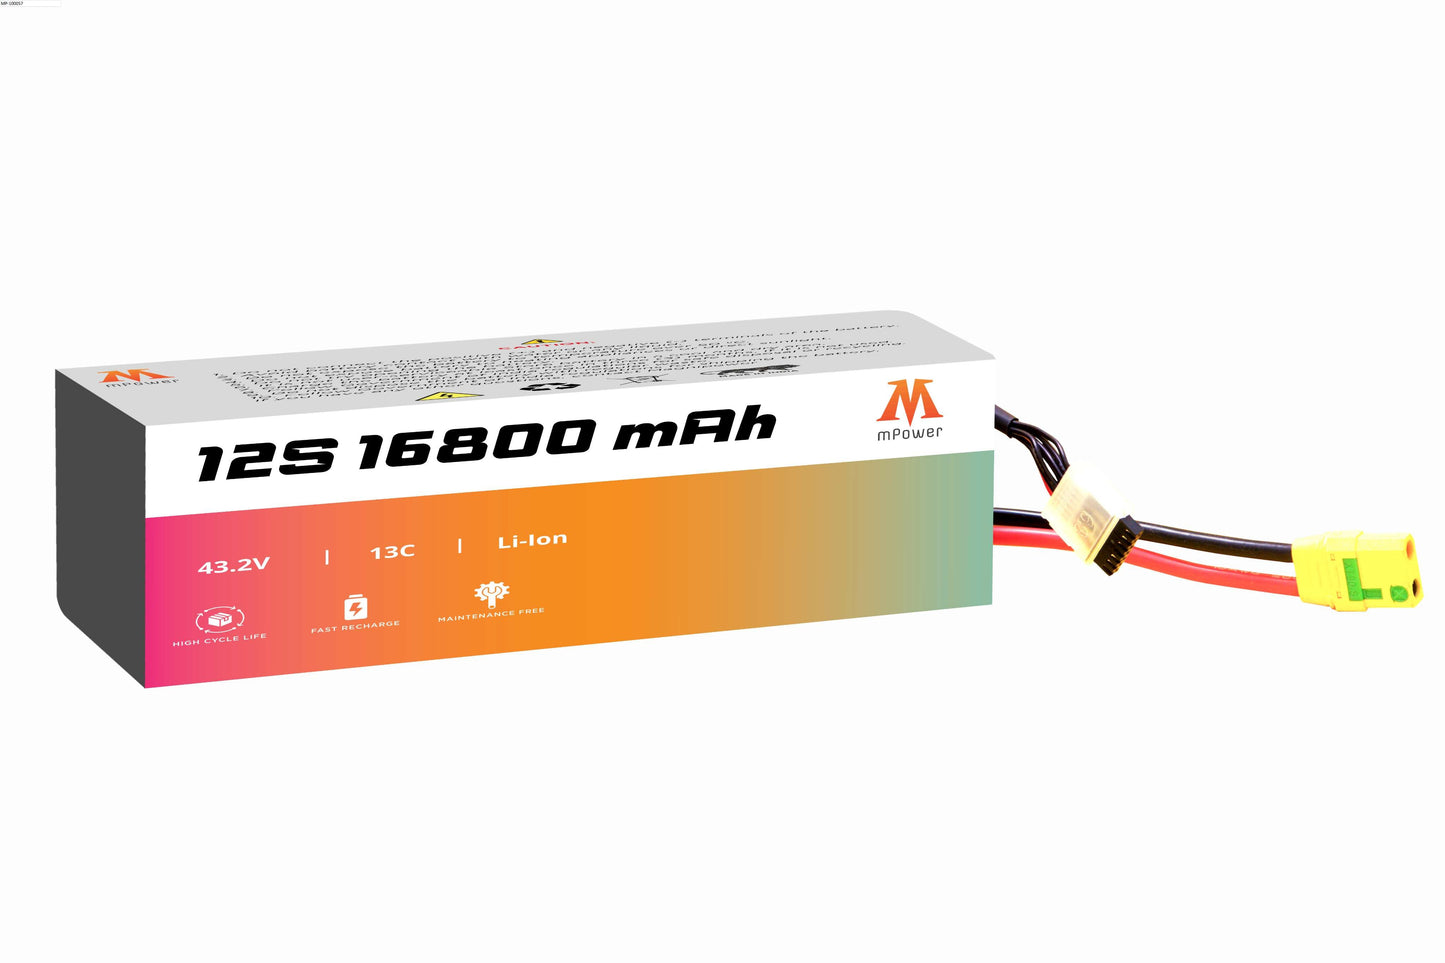 mPower 12S 16800mAh 13C Lithium-Ion Battery for Surveillance Drones